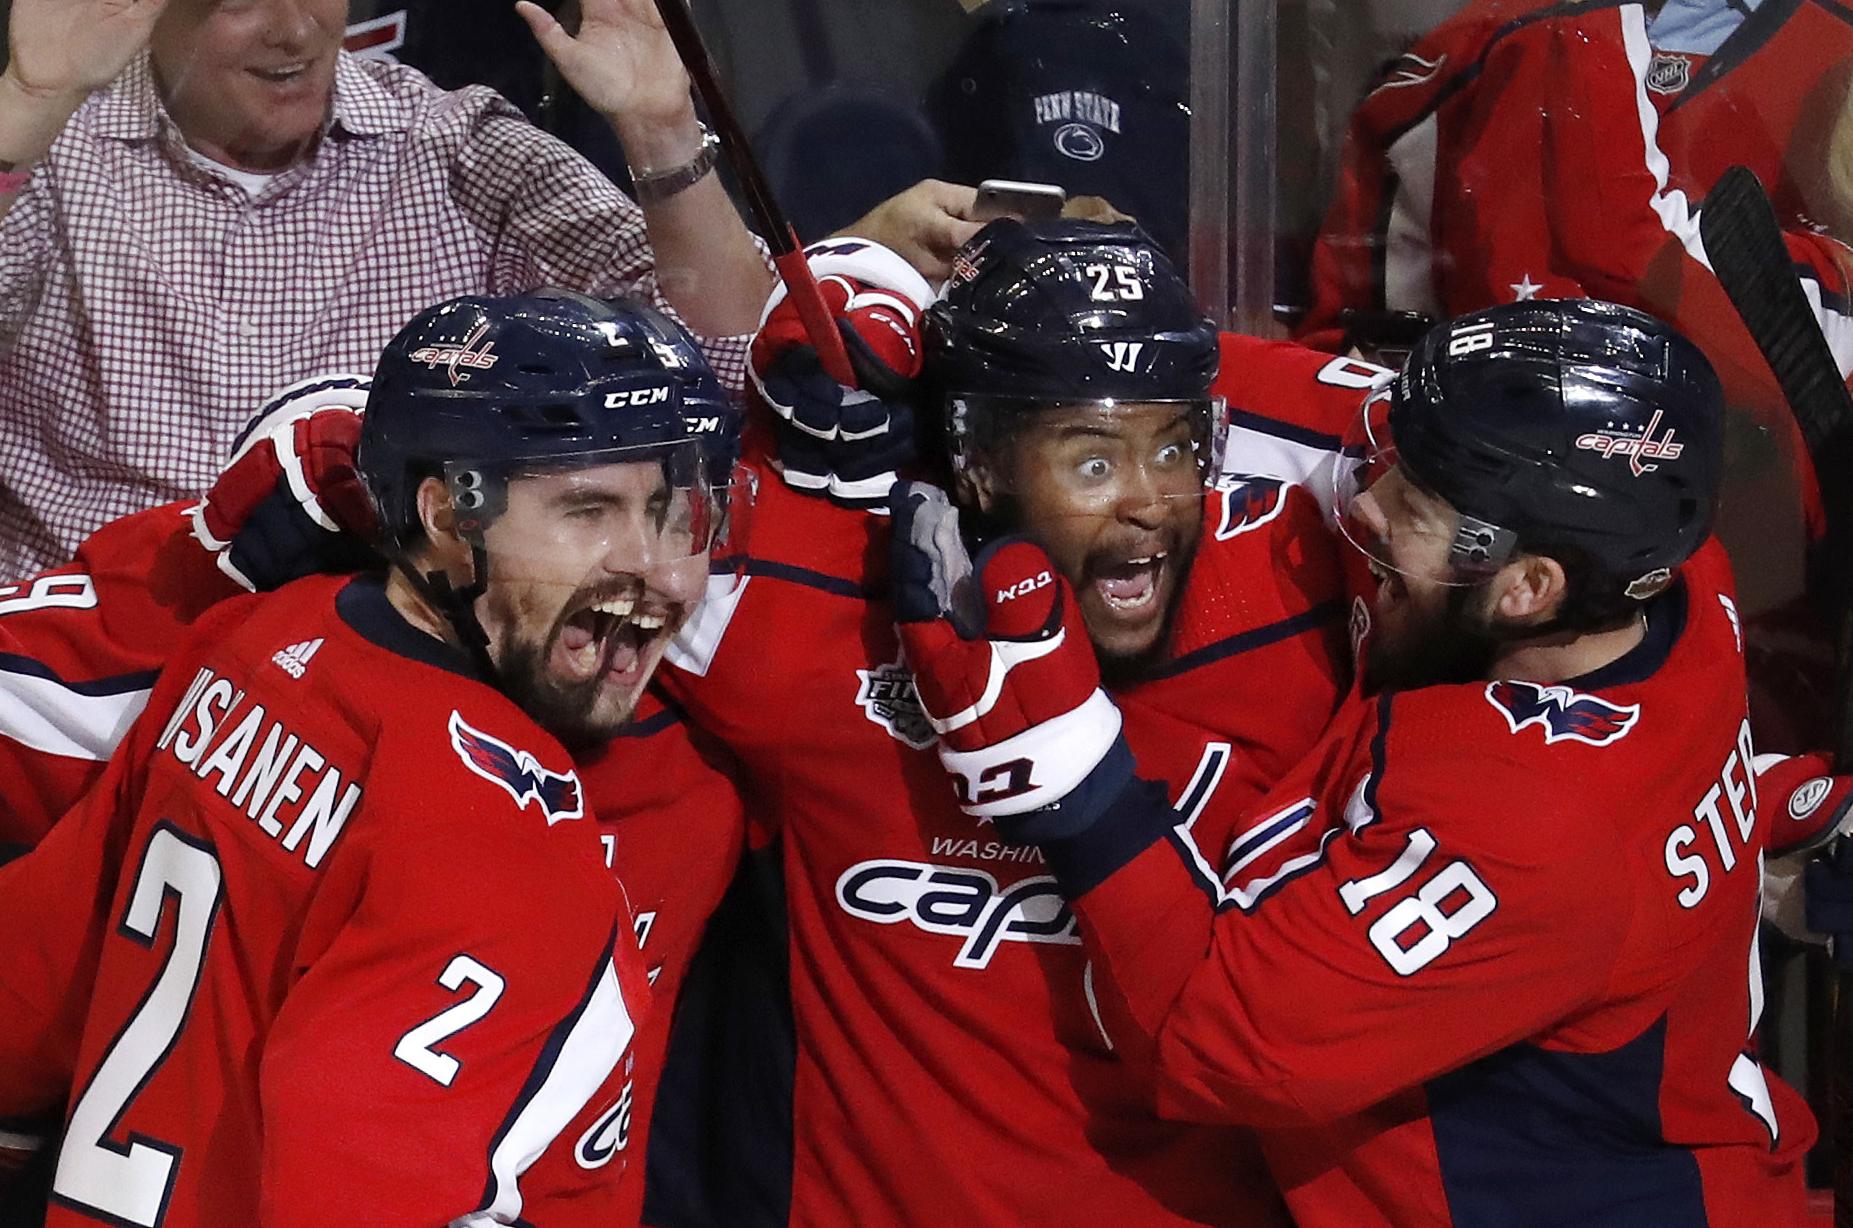 Devante Smith-Pelly starts in return to Chicago after loast season’s ...